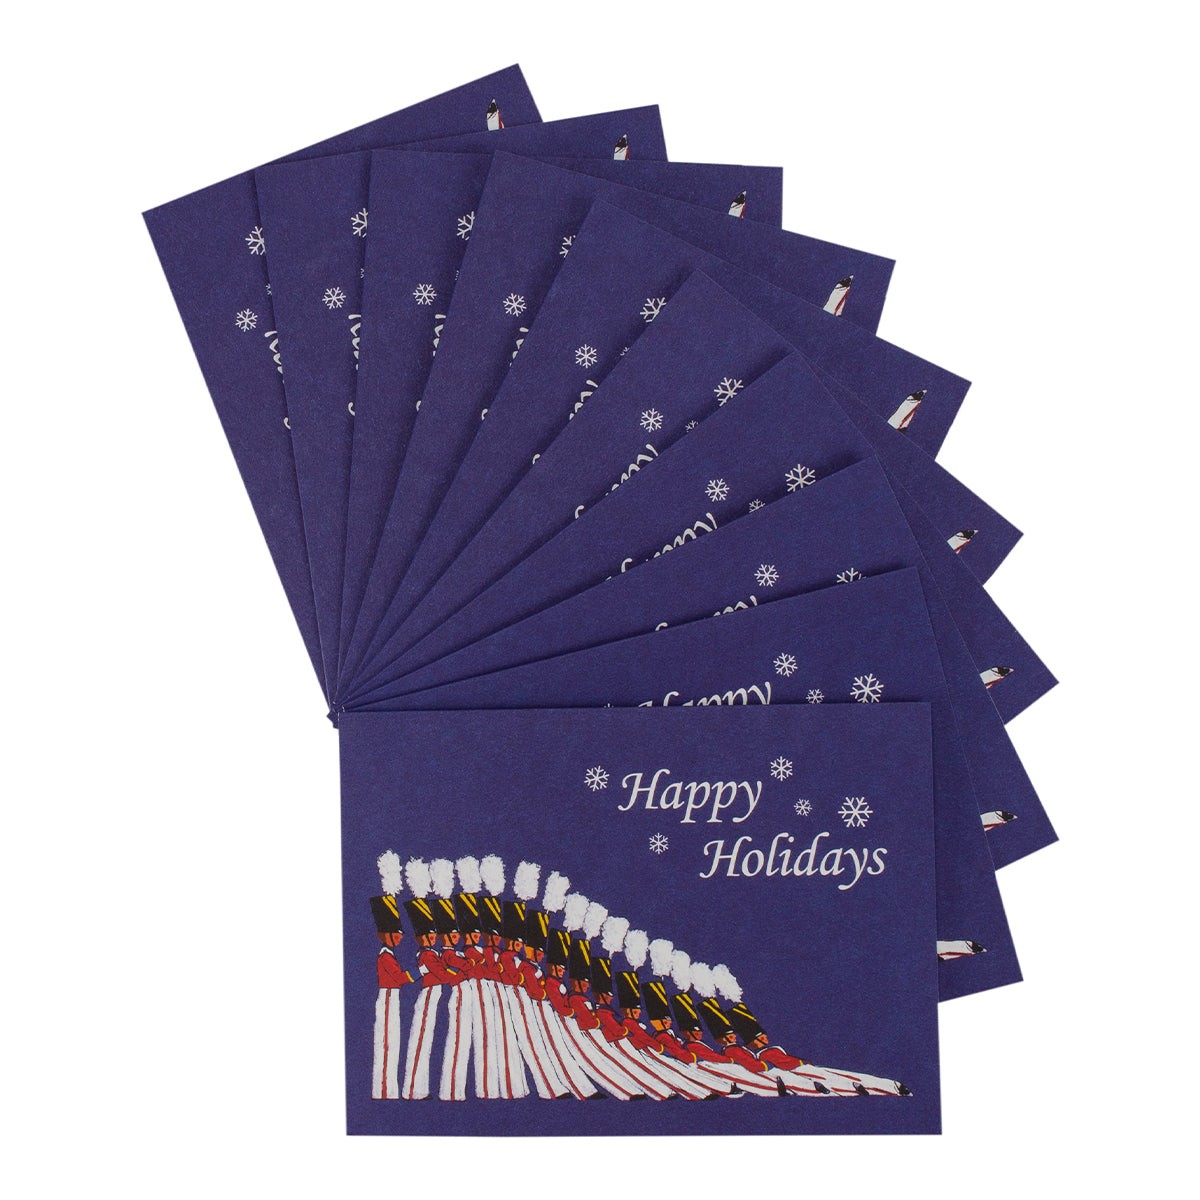 Blue holiday card set, with happy holidays message and toy soldier design